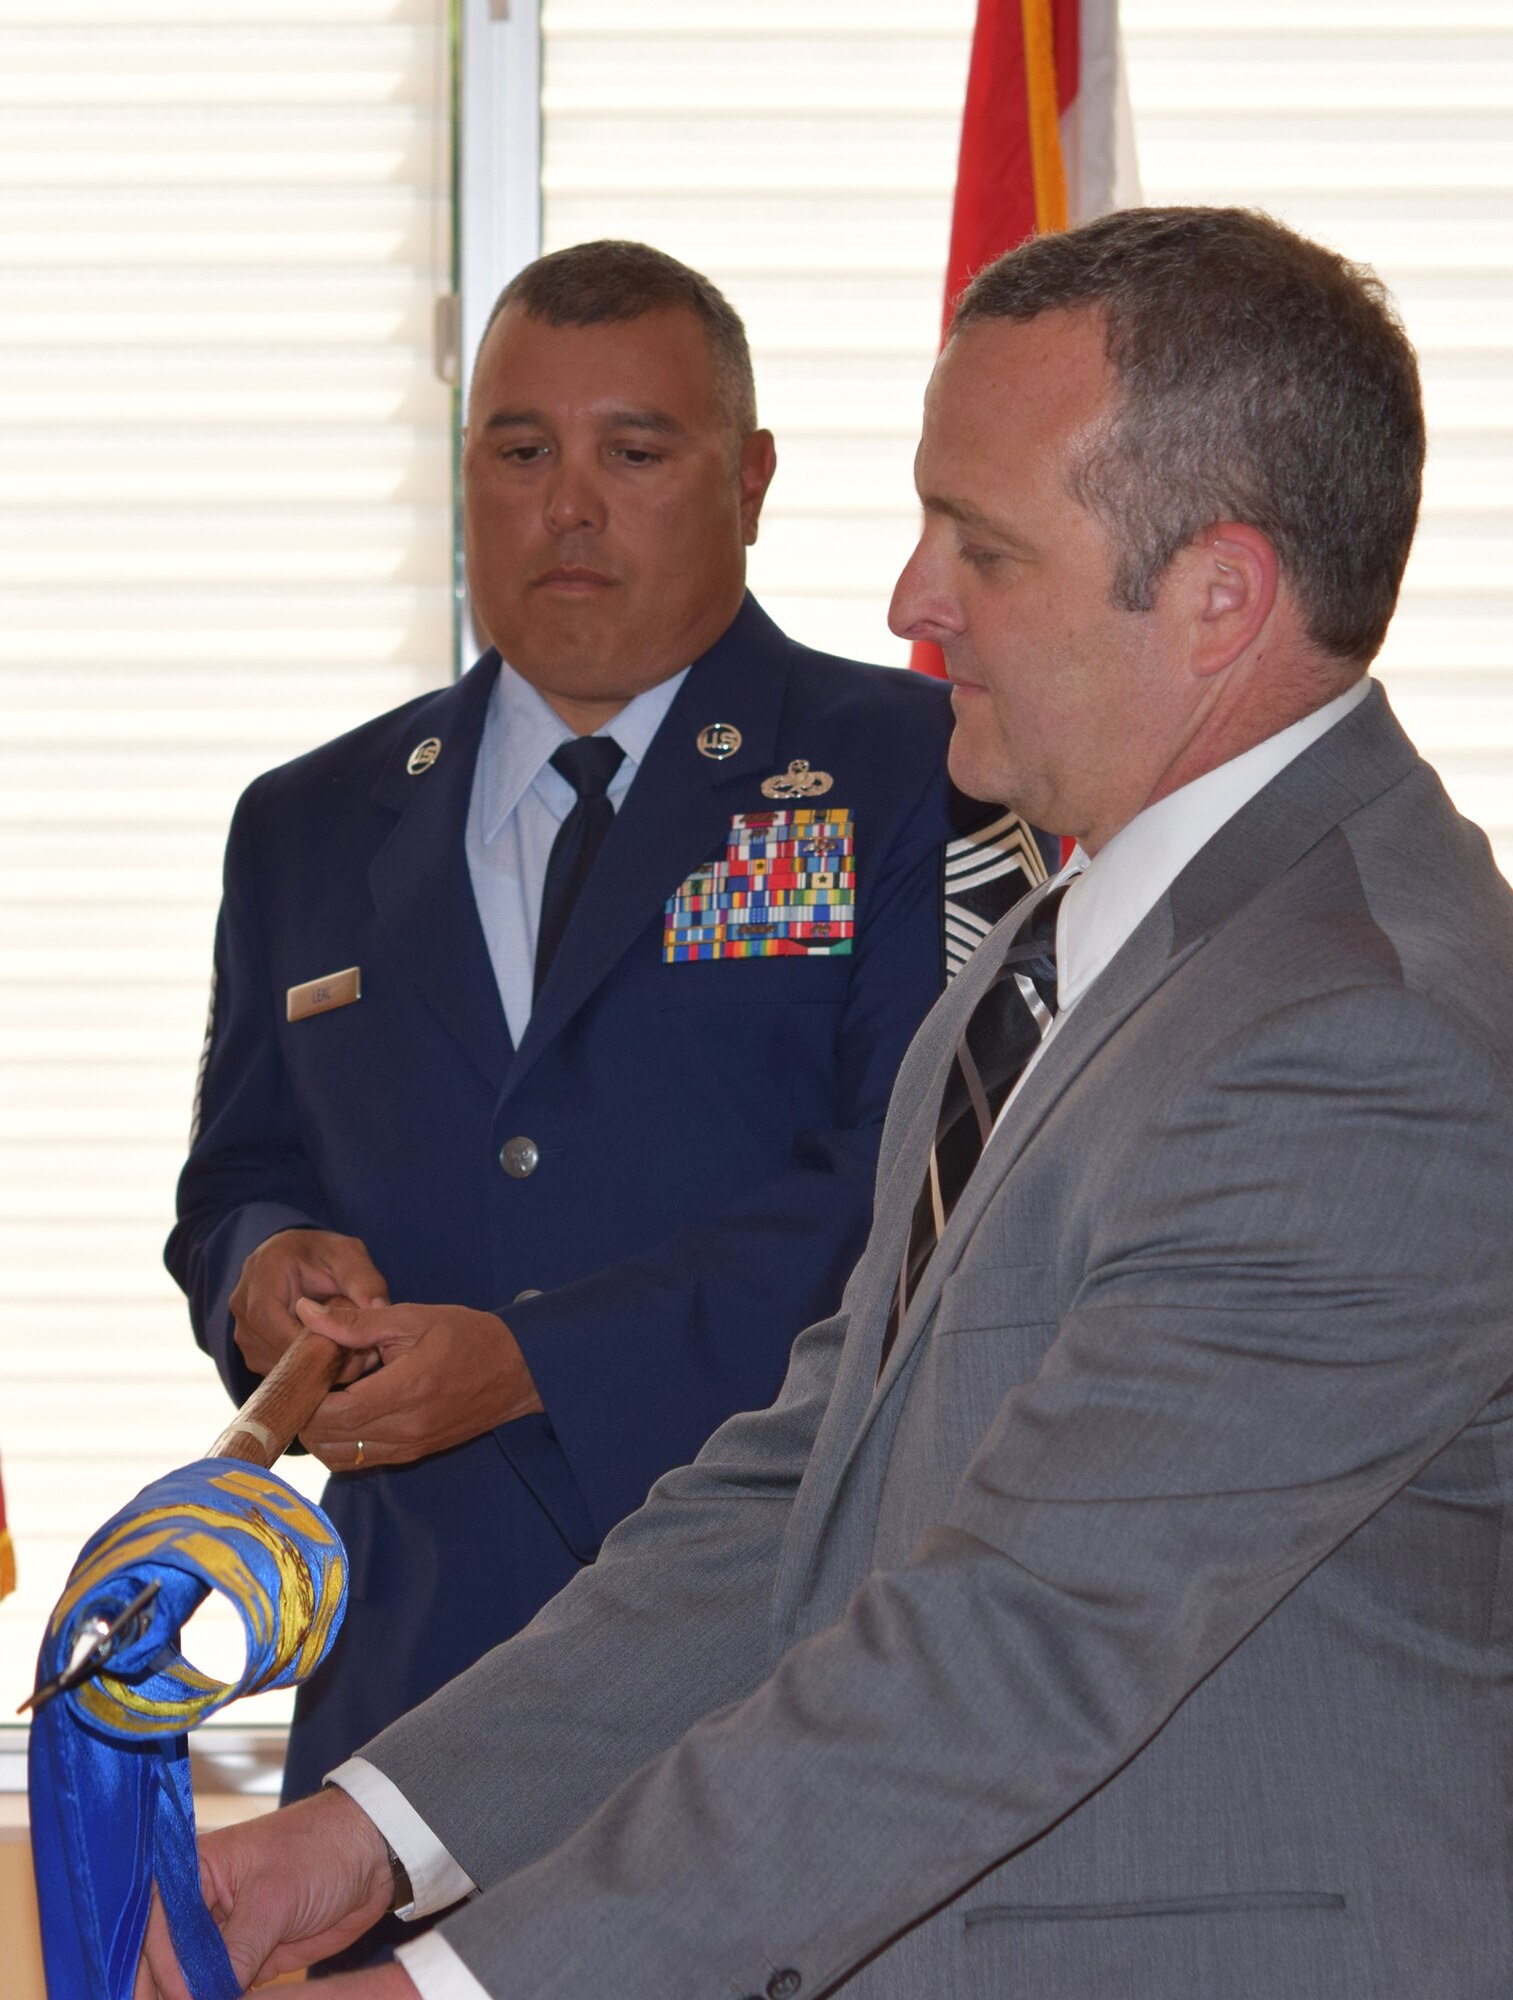 Robert Kraus, the new F-35 Partner Support Complex director, unfurls the unit's guidon during an activation ceremony May 11, 2016, at Eglin Air Force Base, Fla. The complex will provide mission data, intelligence support, lab facilities and training to the eight partner countries purchasing F-35 Lightning II aircraft. (U.S. Air Force photo/1st Lt. Amanda Farr)